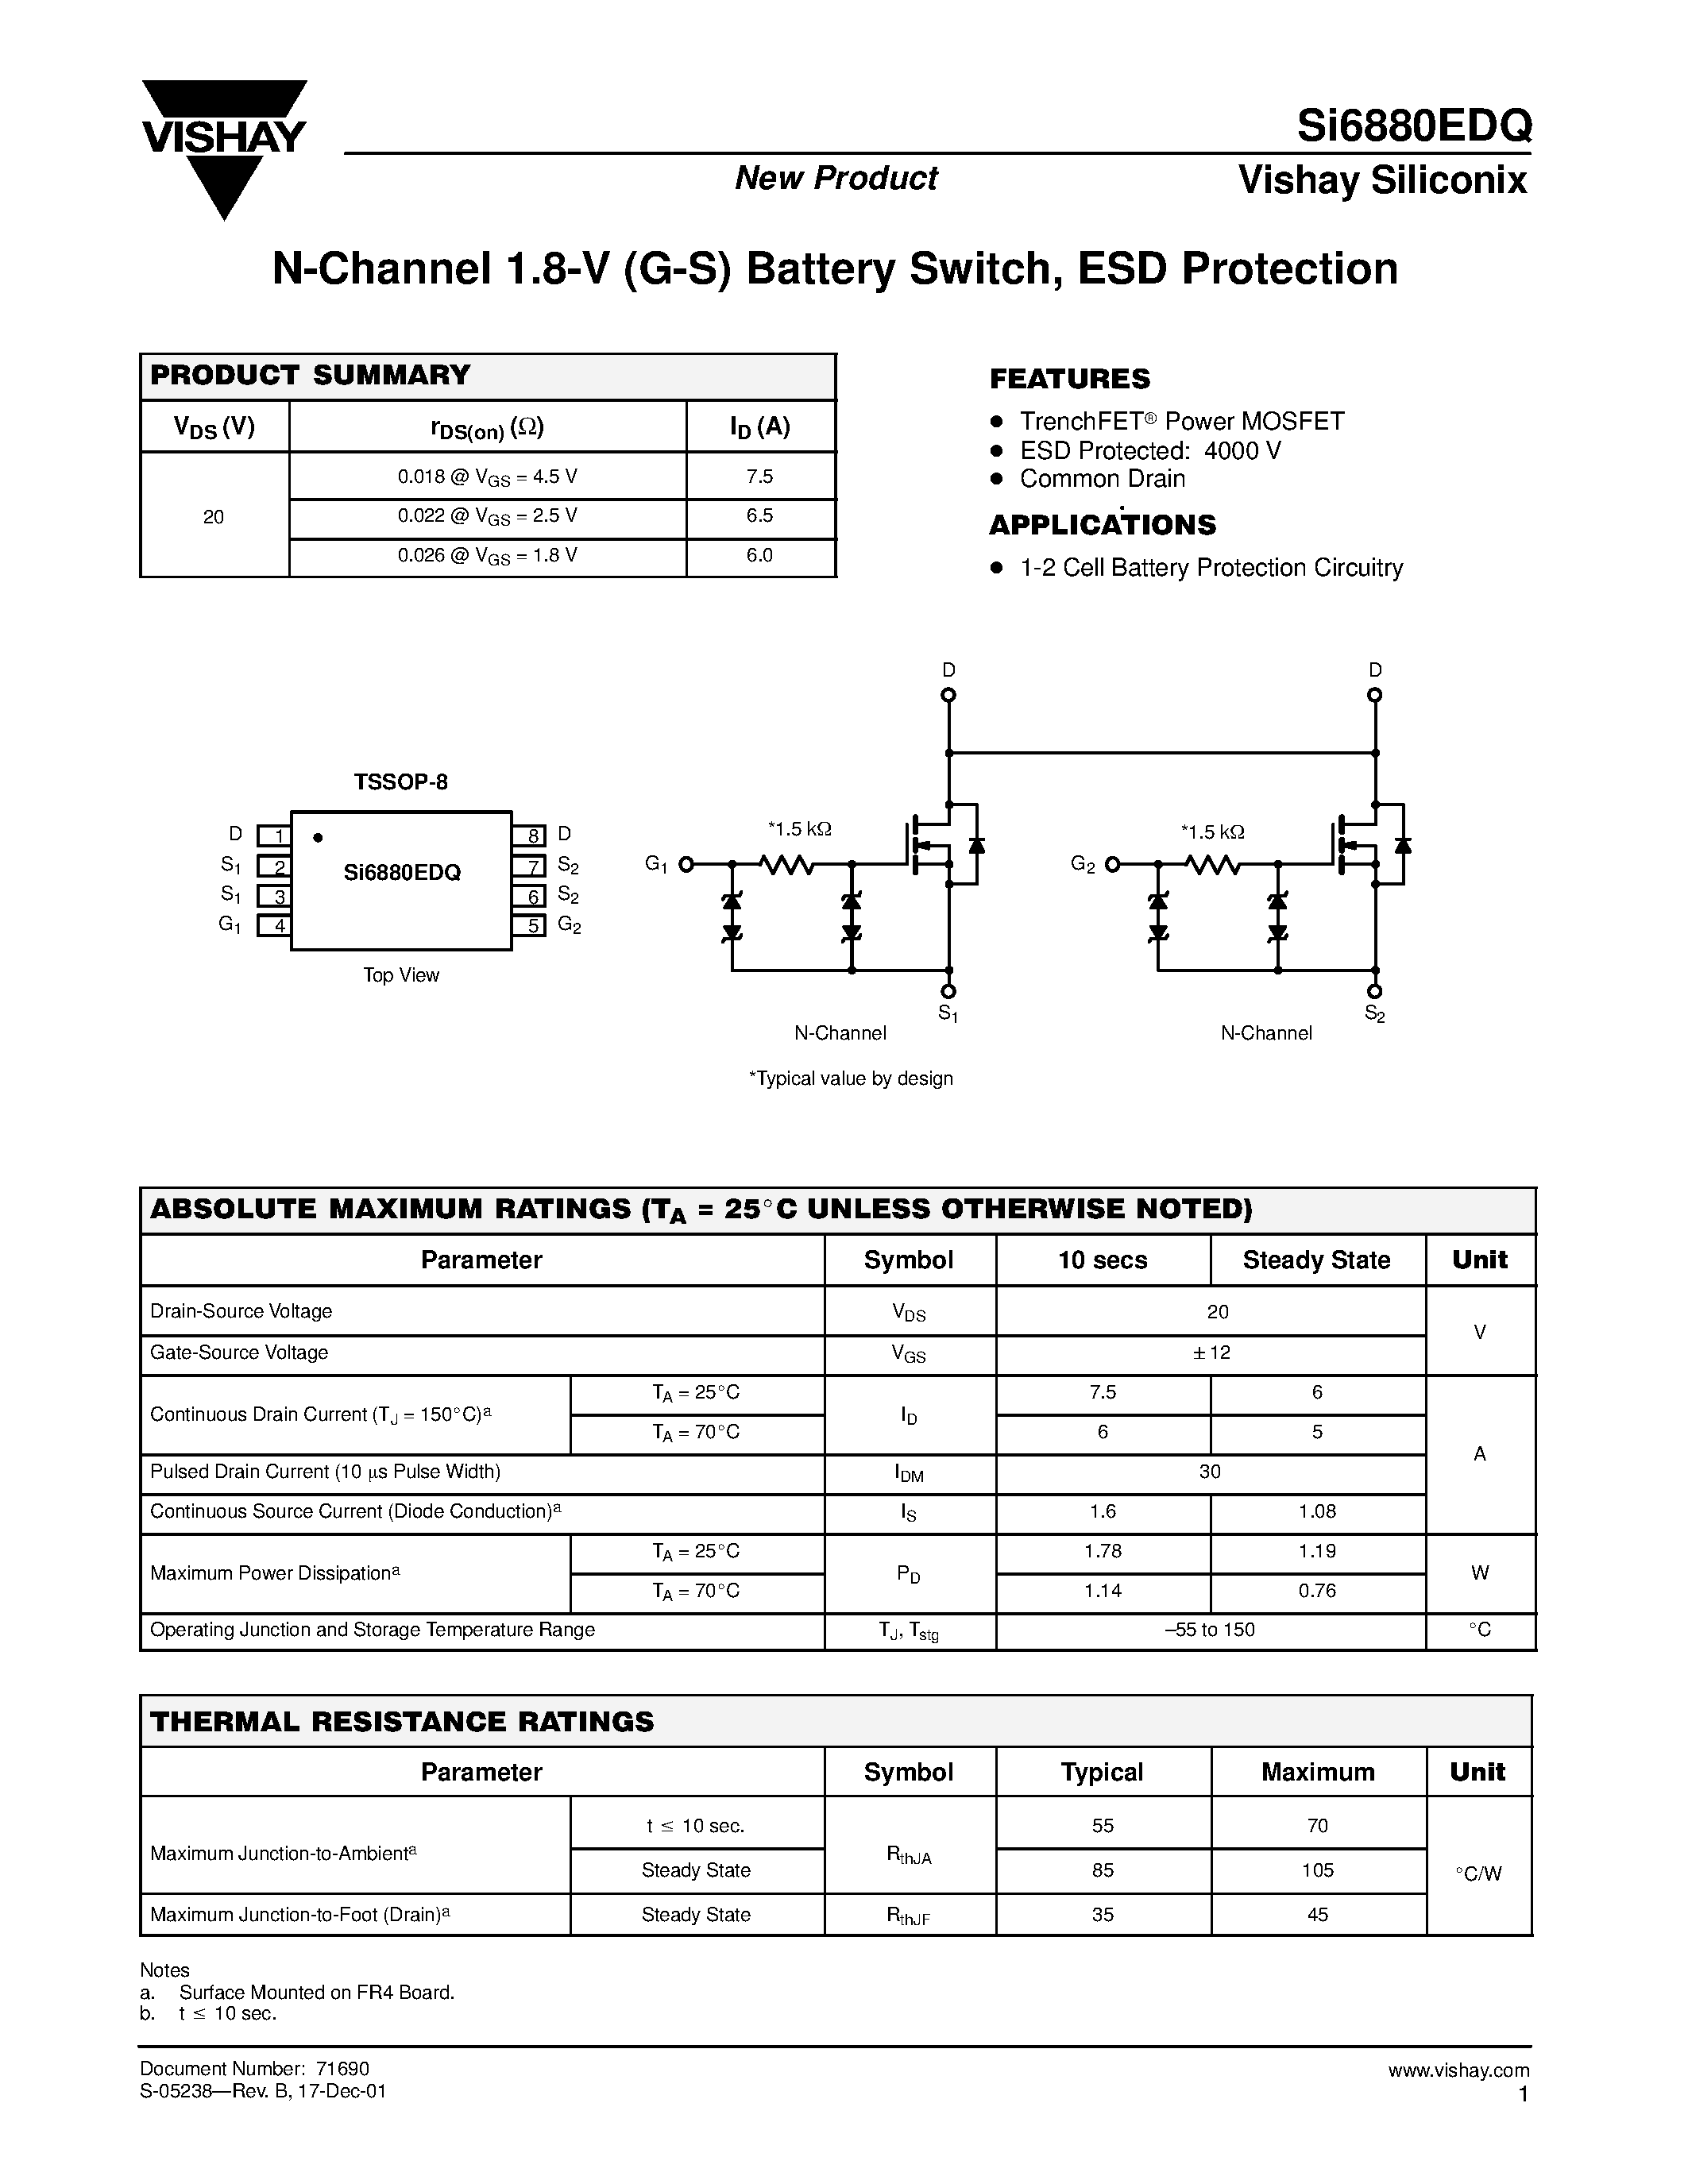 Datasheet SI6880EDQ - N-Channel 1.8-V (G-S) Battery Switch/ ESD Protection page 1